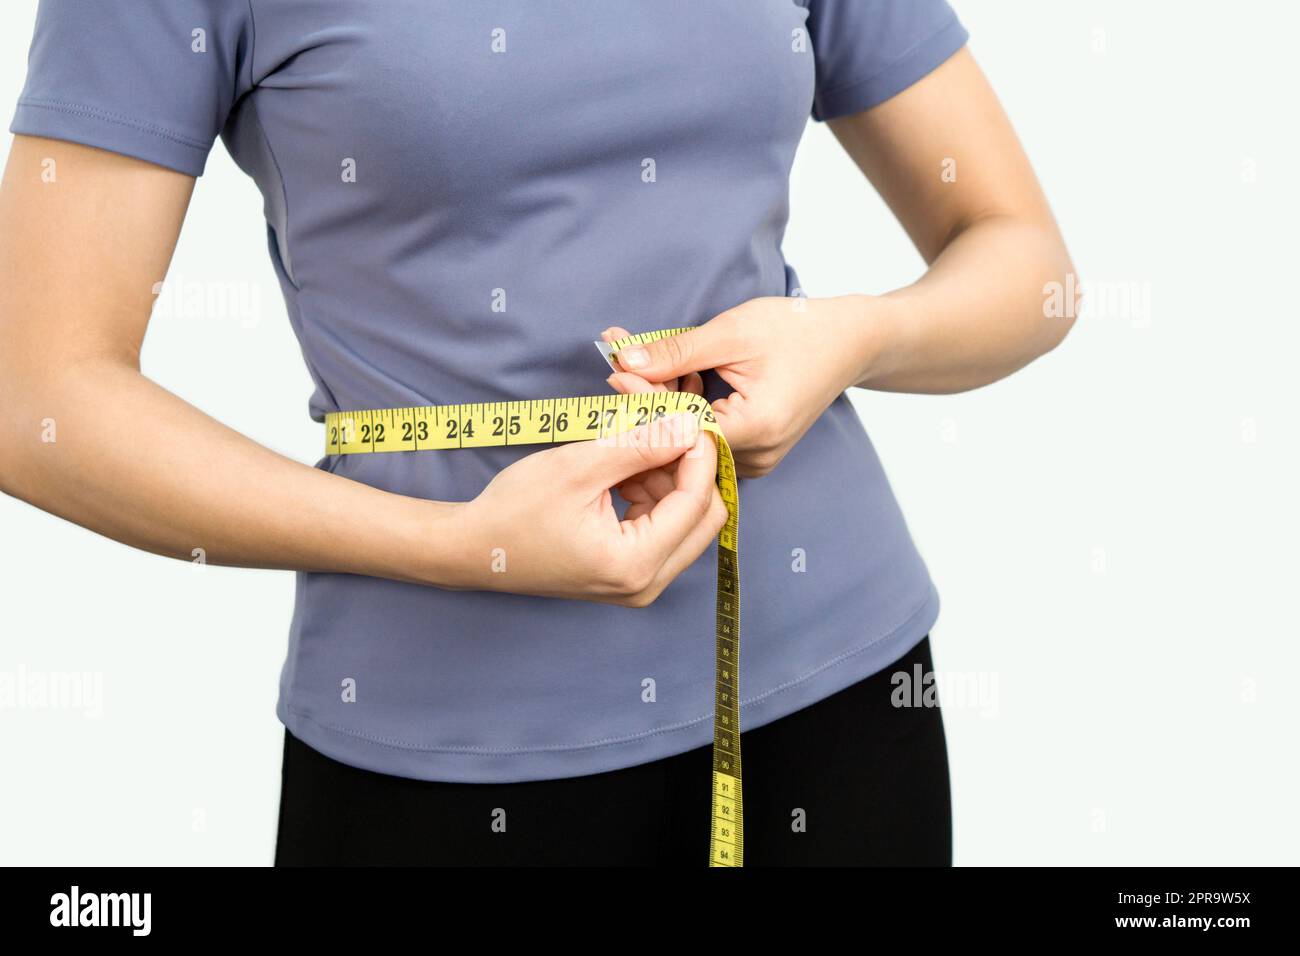 https://c8.alamy.com/comp/2PR9W5X/closeup-female-hands-in-exercise-clothes-use-a-tape-measure-to-measure-around-the-waist-healthy-nutrition-and-weight-losing-concept-portrait-on-white-background-with-studio-light-2PR9W5X.jpg